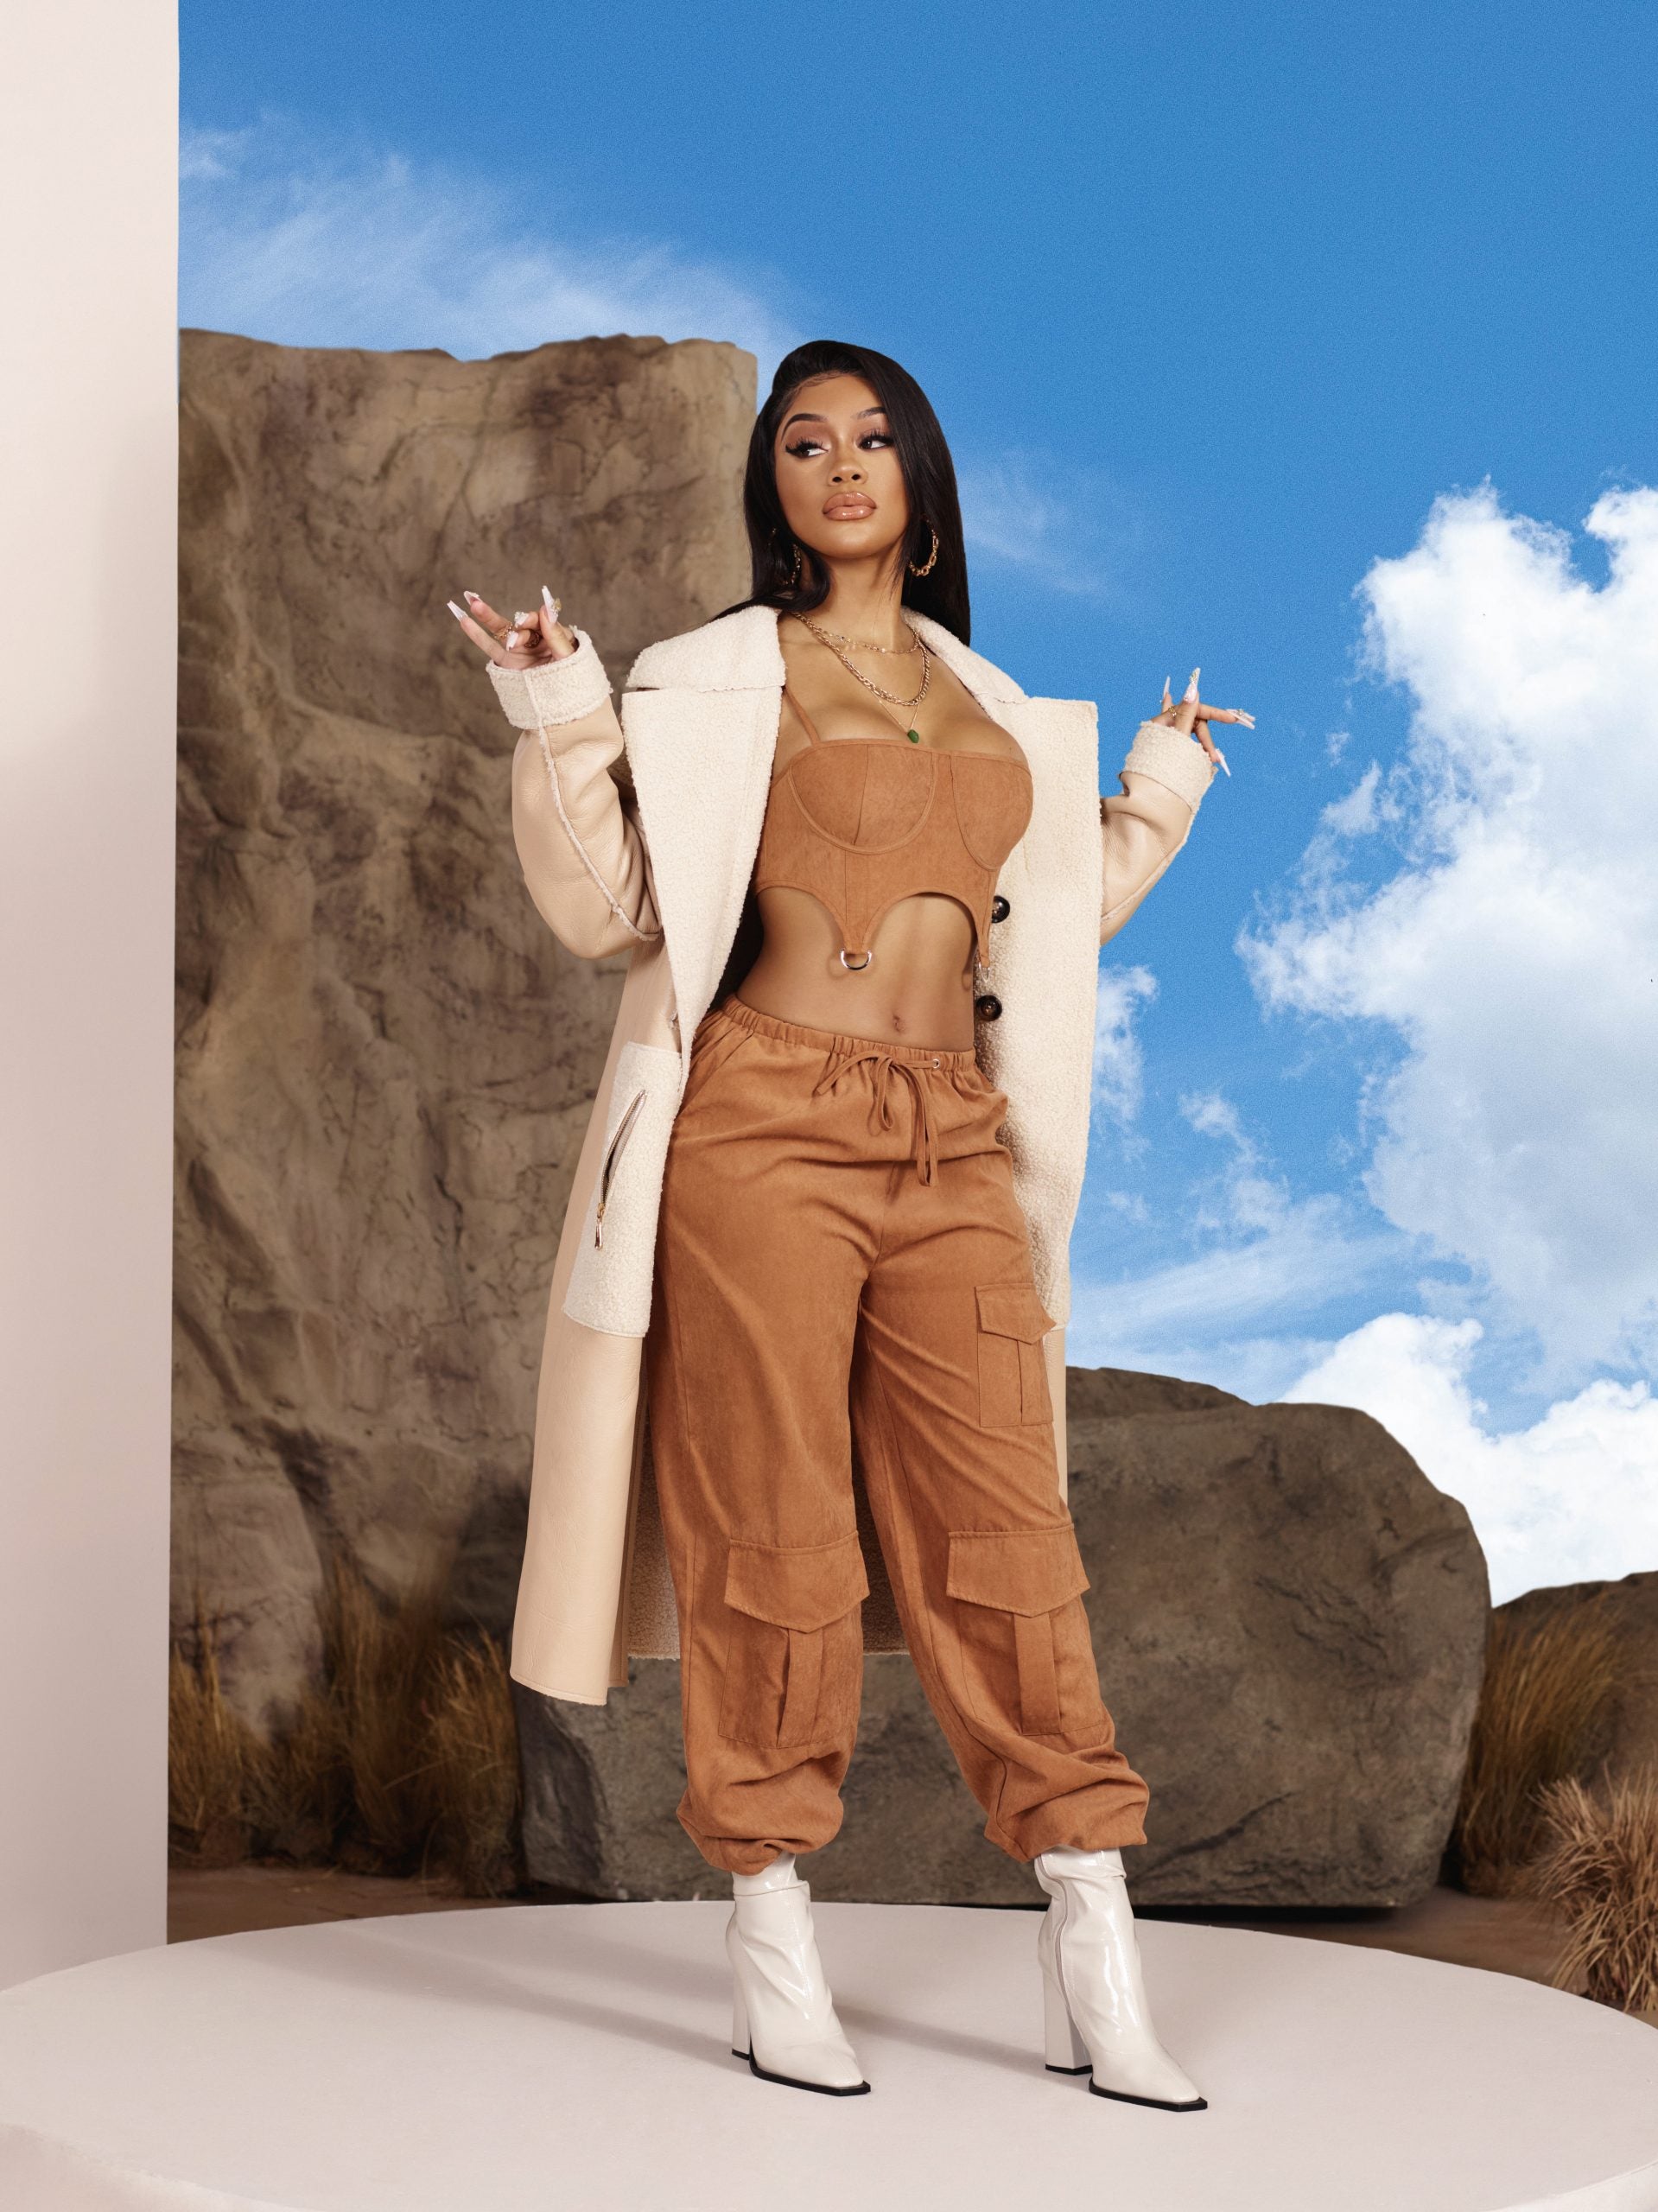 Saweetie Launches Third PrettyLittleThing Collection